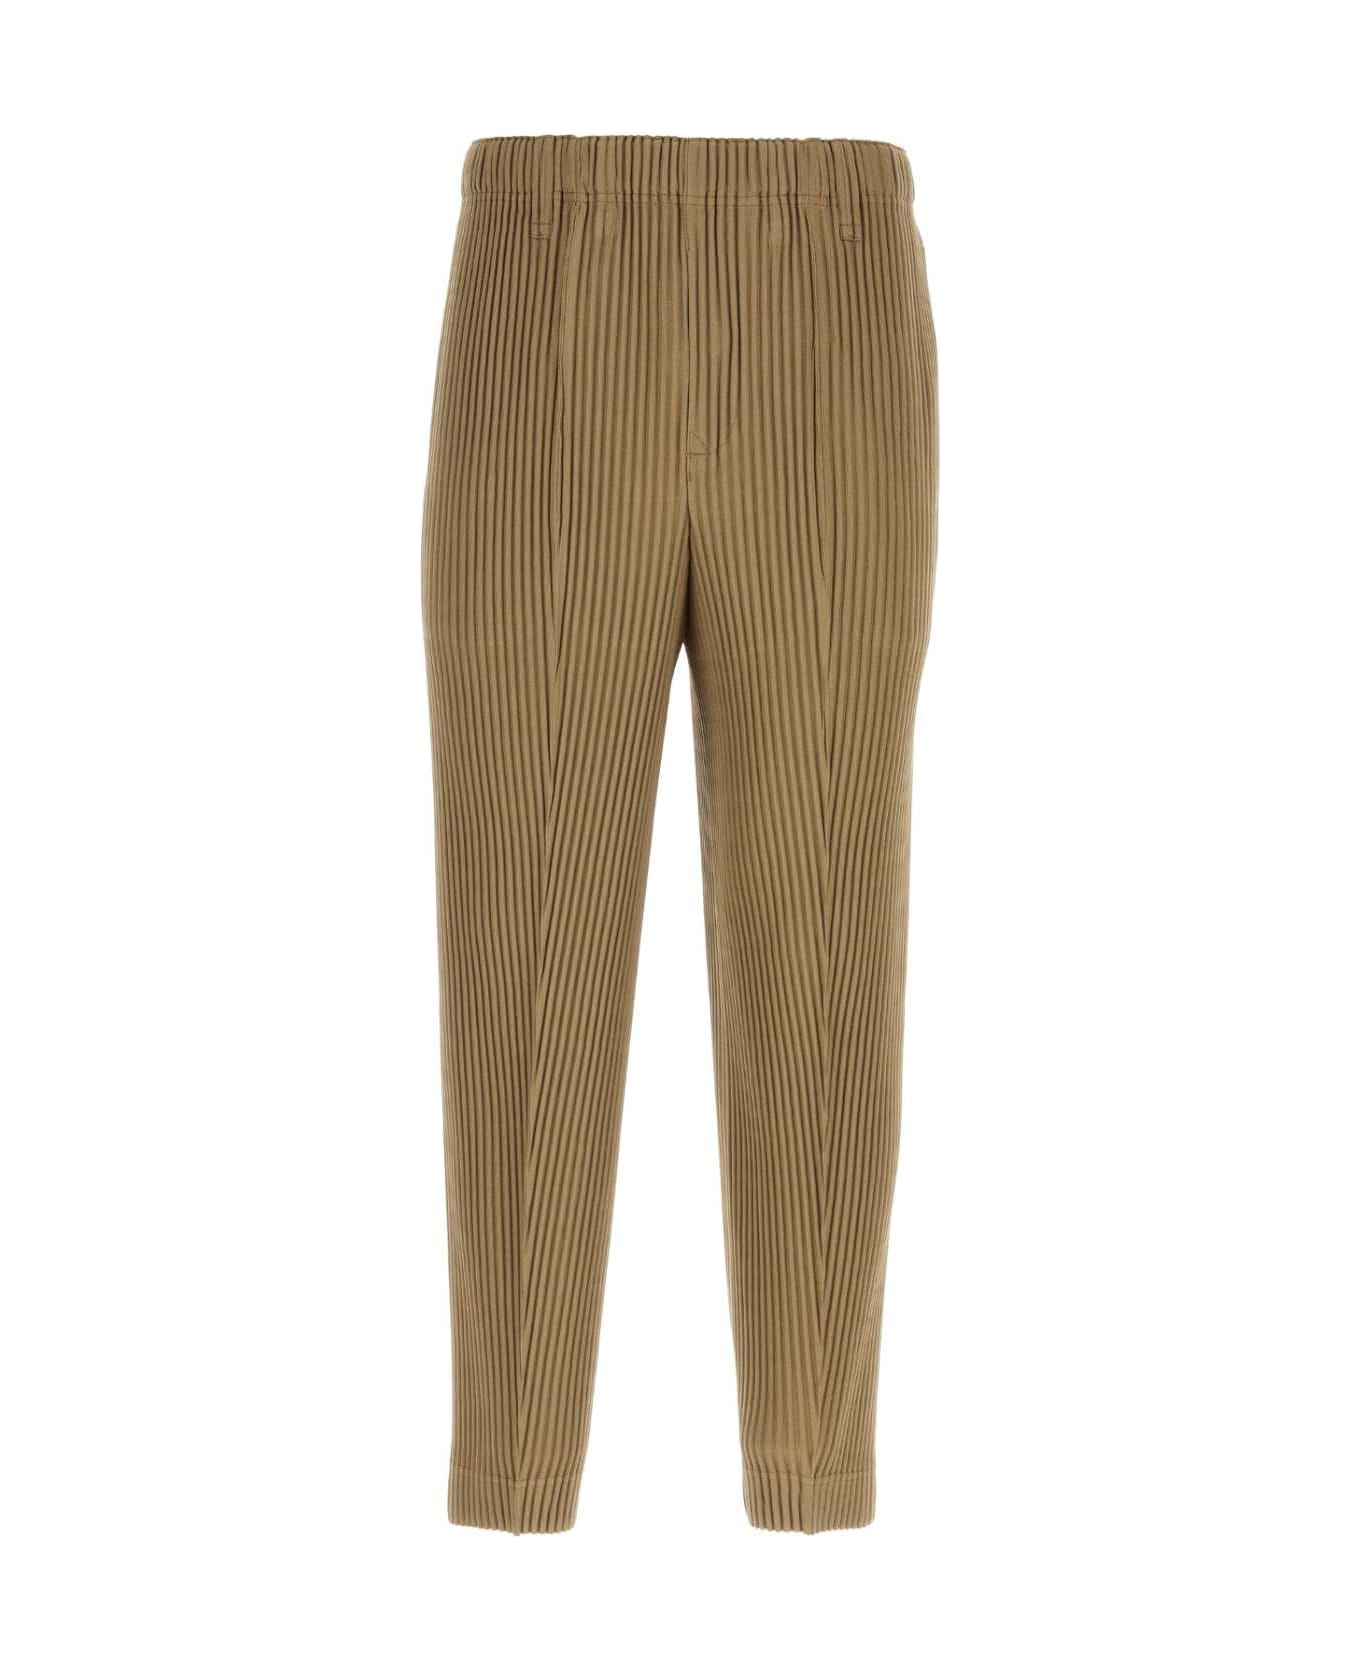 Homme Plissé Issey Miyake Cappuccino Polyester Pant - LIGHTMOCHABROWN